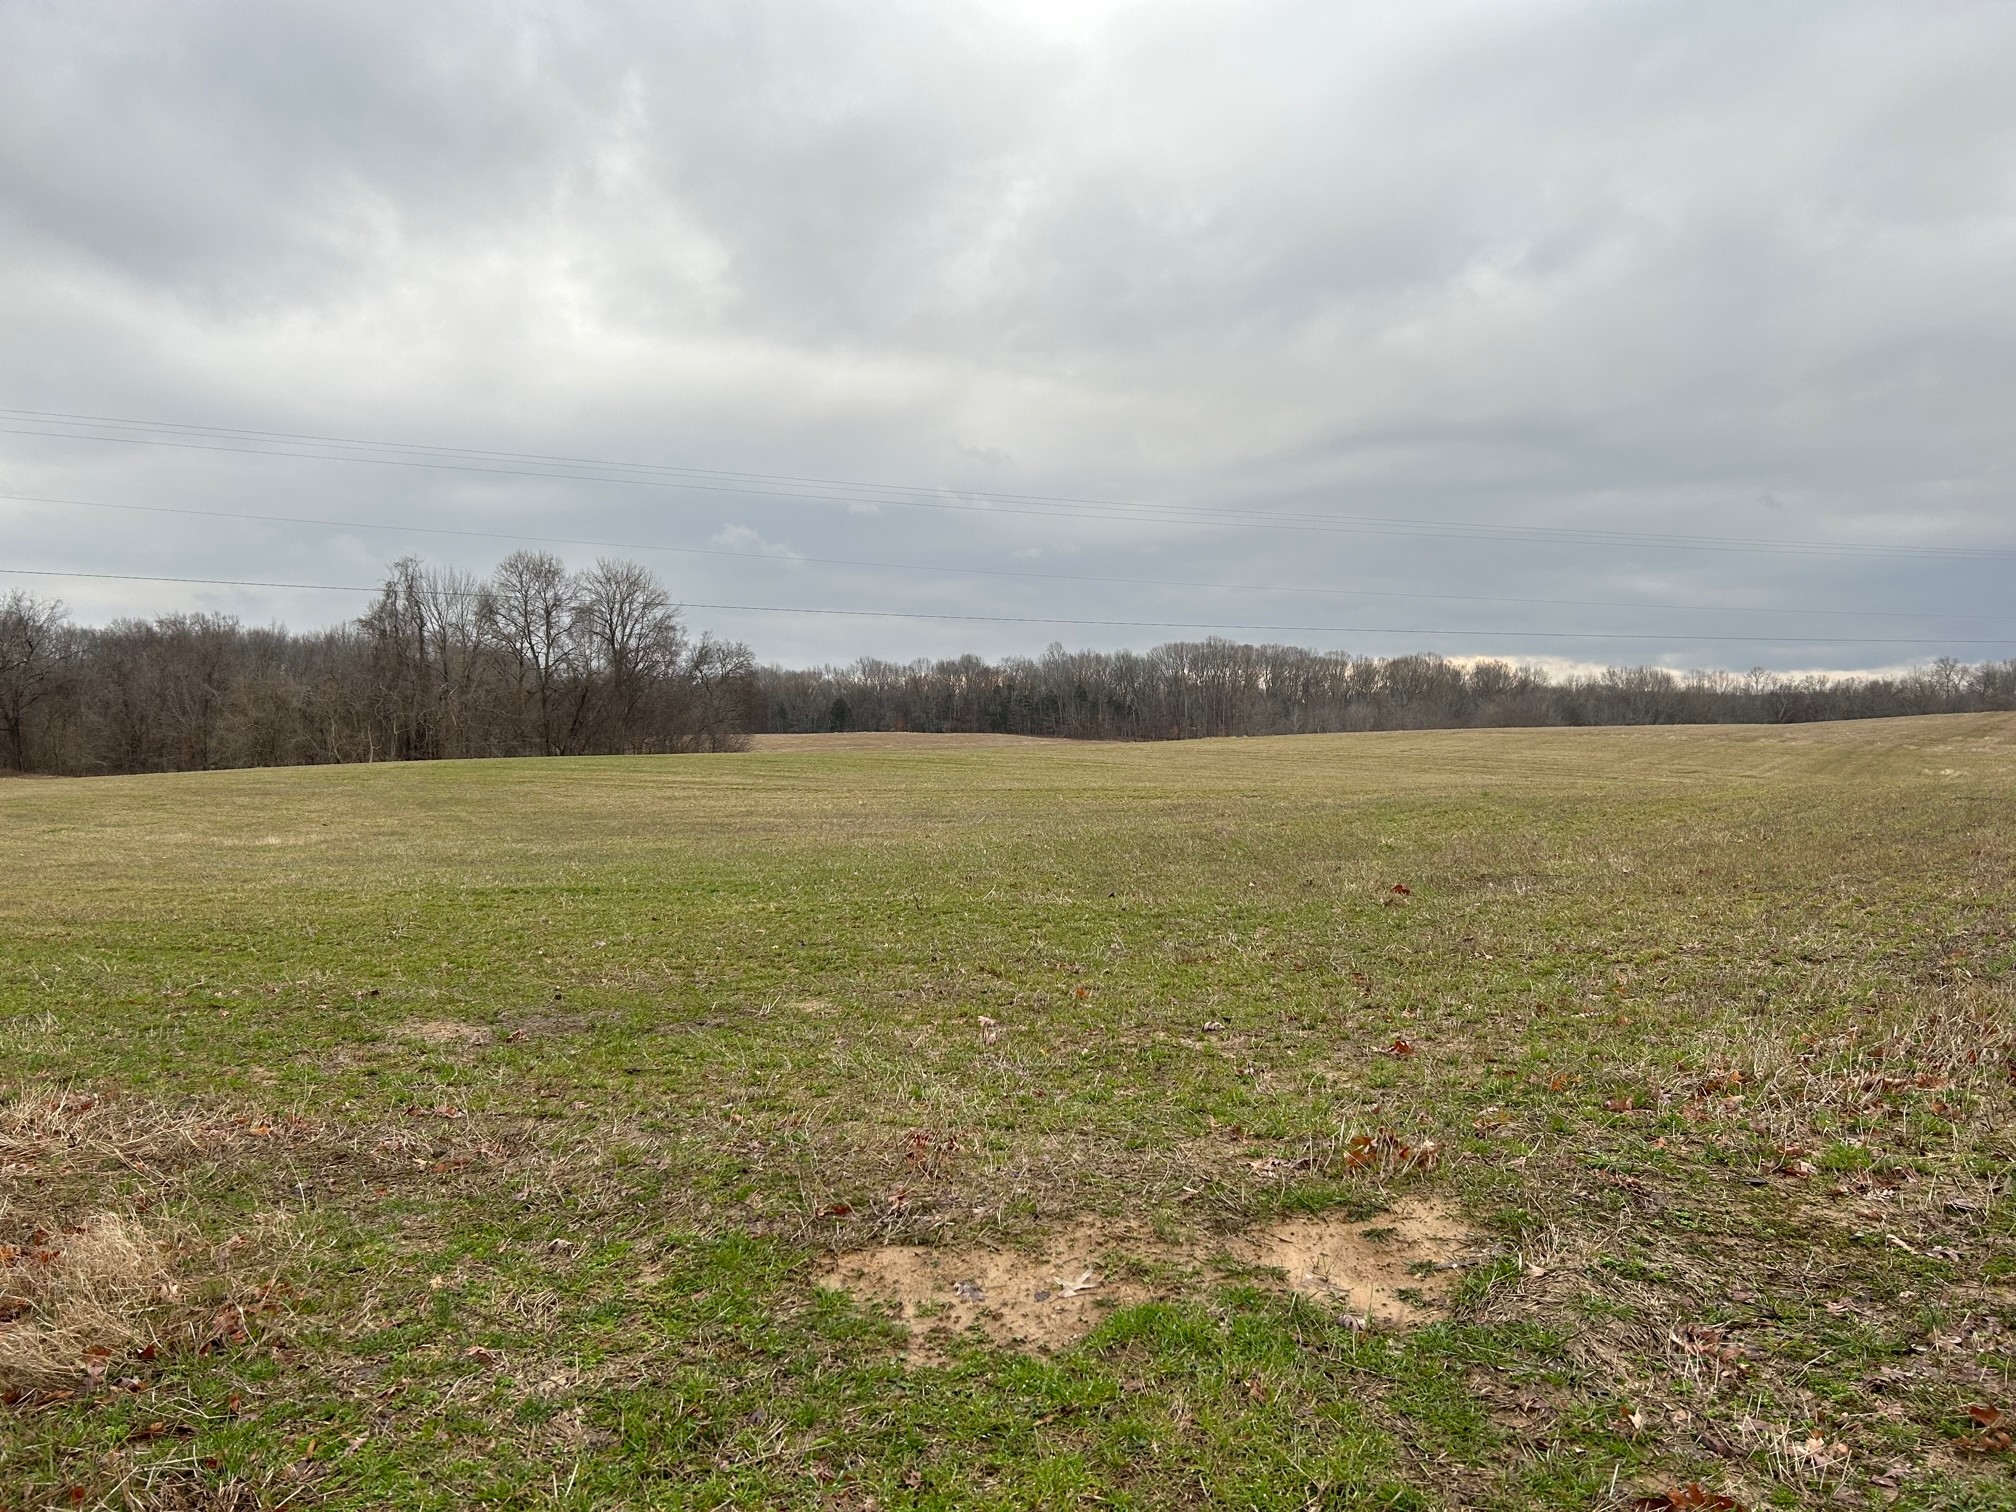 Specular 50 Acres to build your dream home. Don't miss this opportunity.